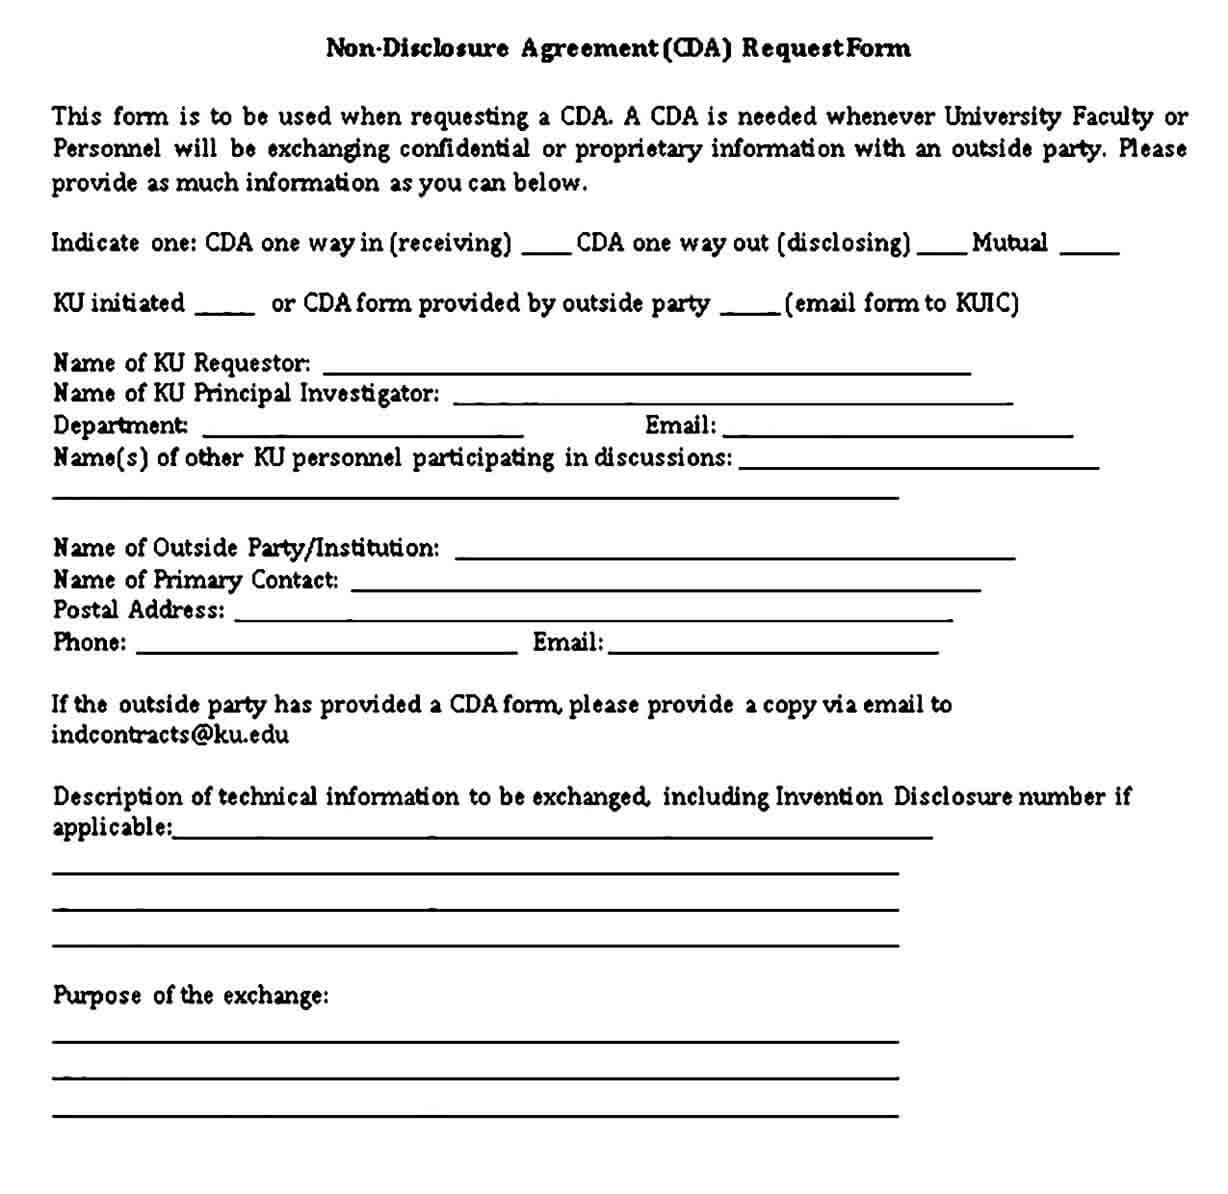 Blank Non Disclosure Agreement Request Form